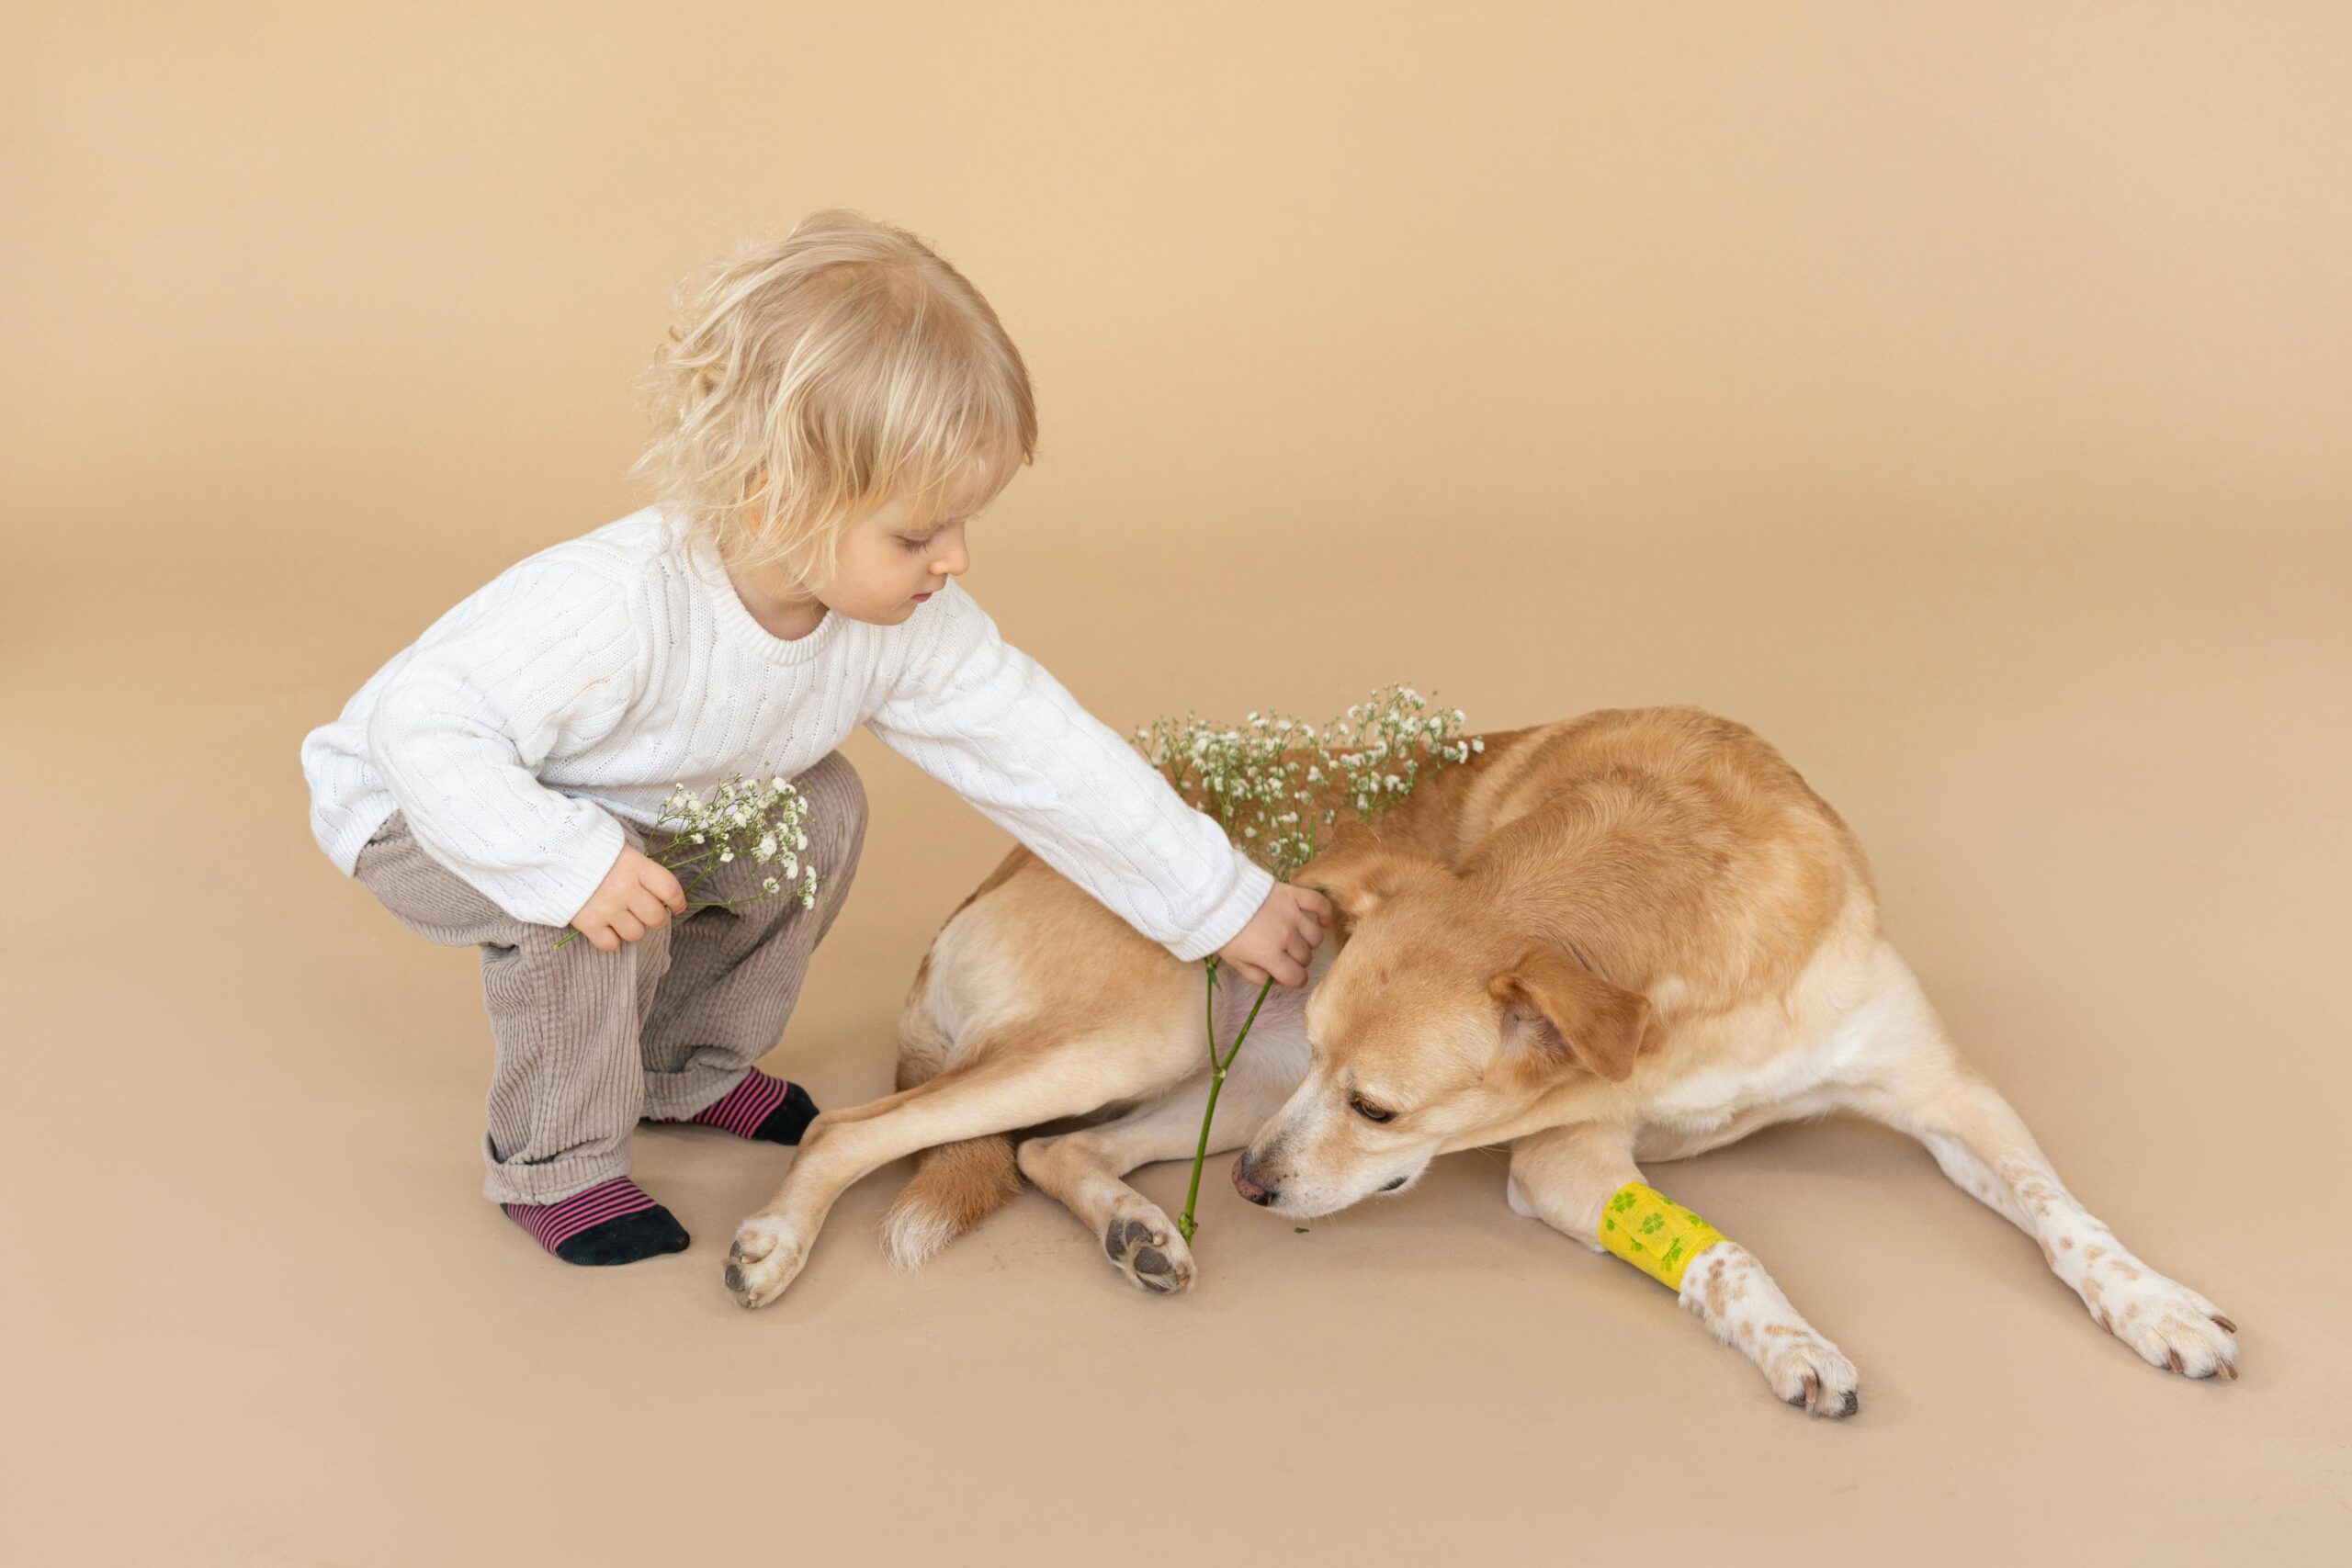 Child giving flowers to dog.